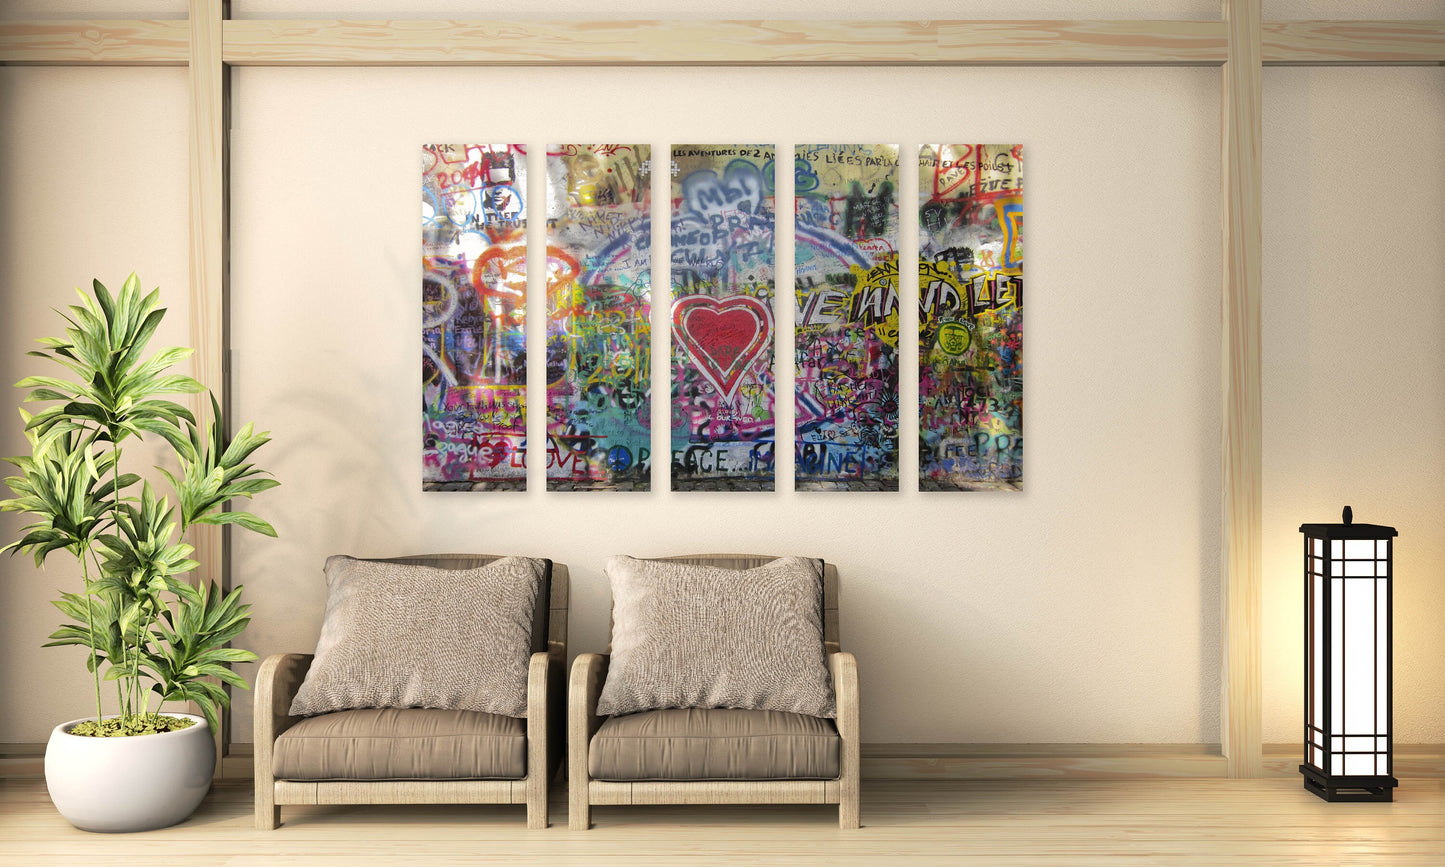 Abstract street art canvas, love paintings, graffiti wall art canvas paintings, trendy wall art, graffiti poster, red heart wall art